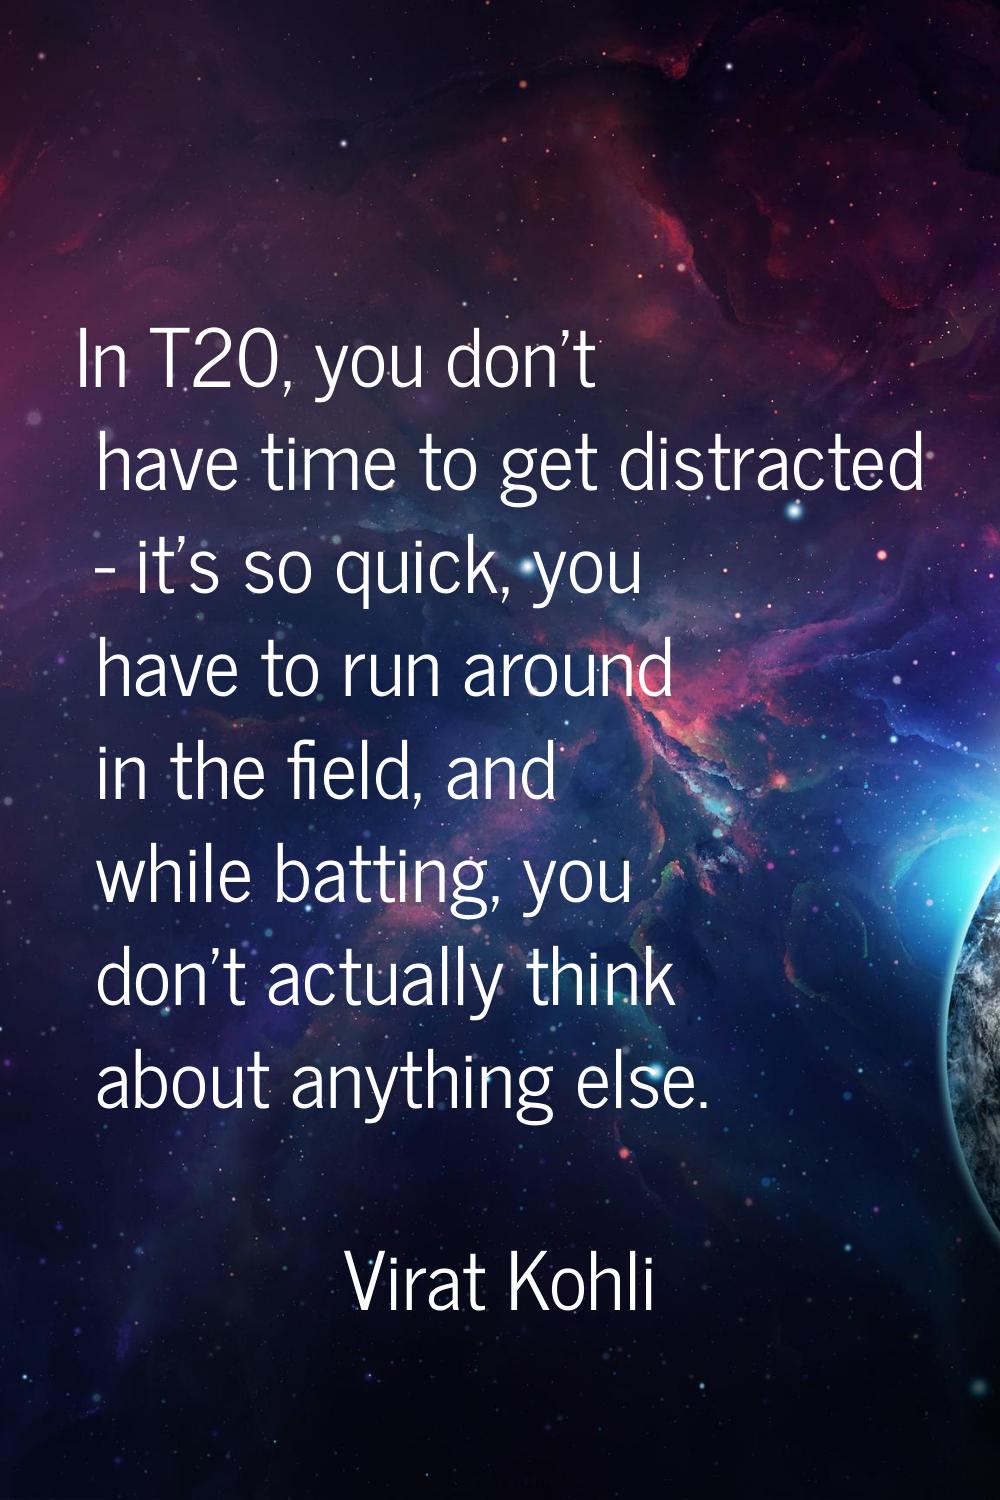 In T20, you don't have time to get distracted - it's so quick, you have to run around in the field,